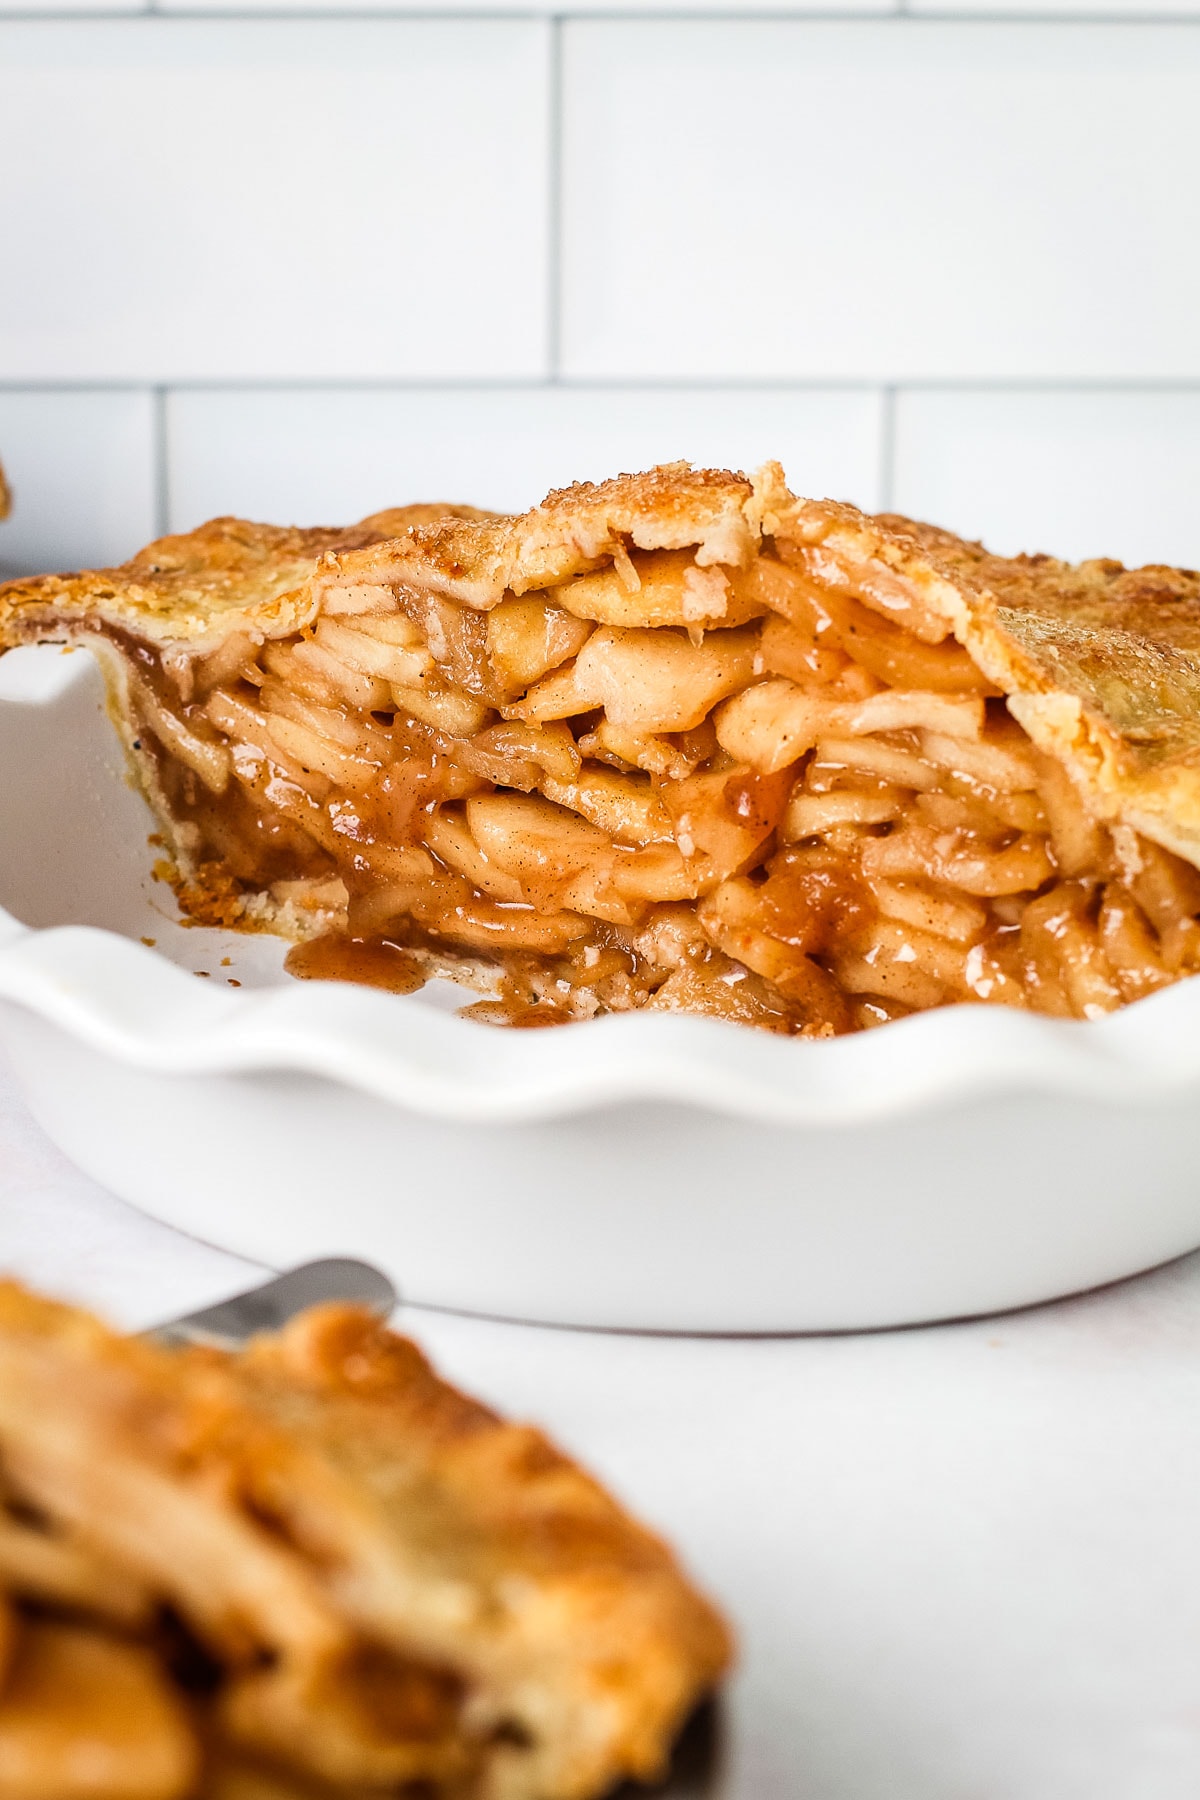 A mile high apple pie packed cut in half to reveal an apple packed pie.